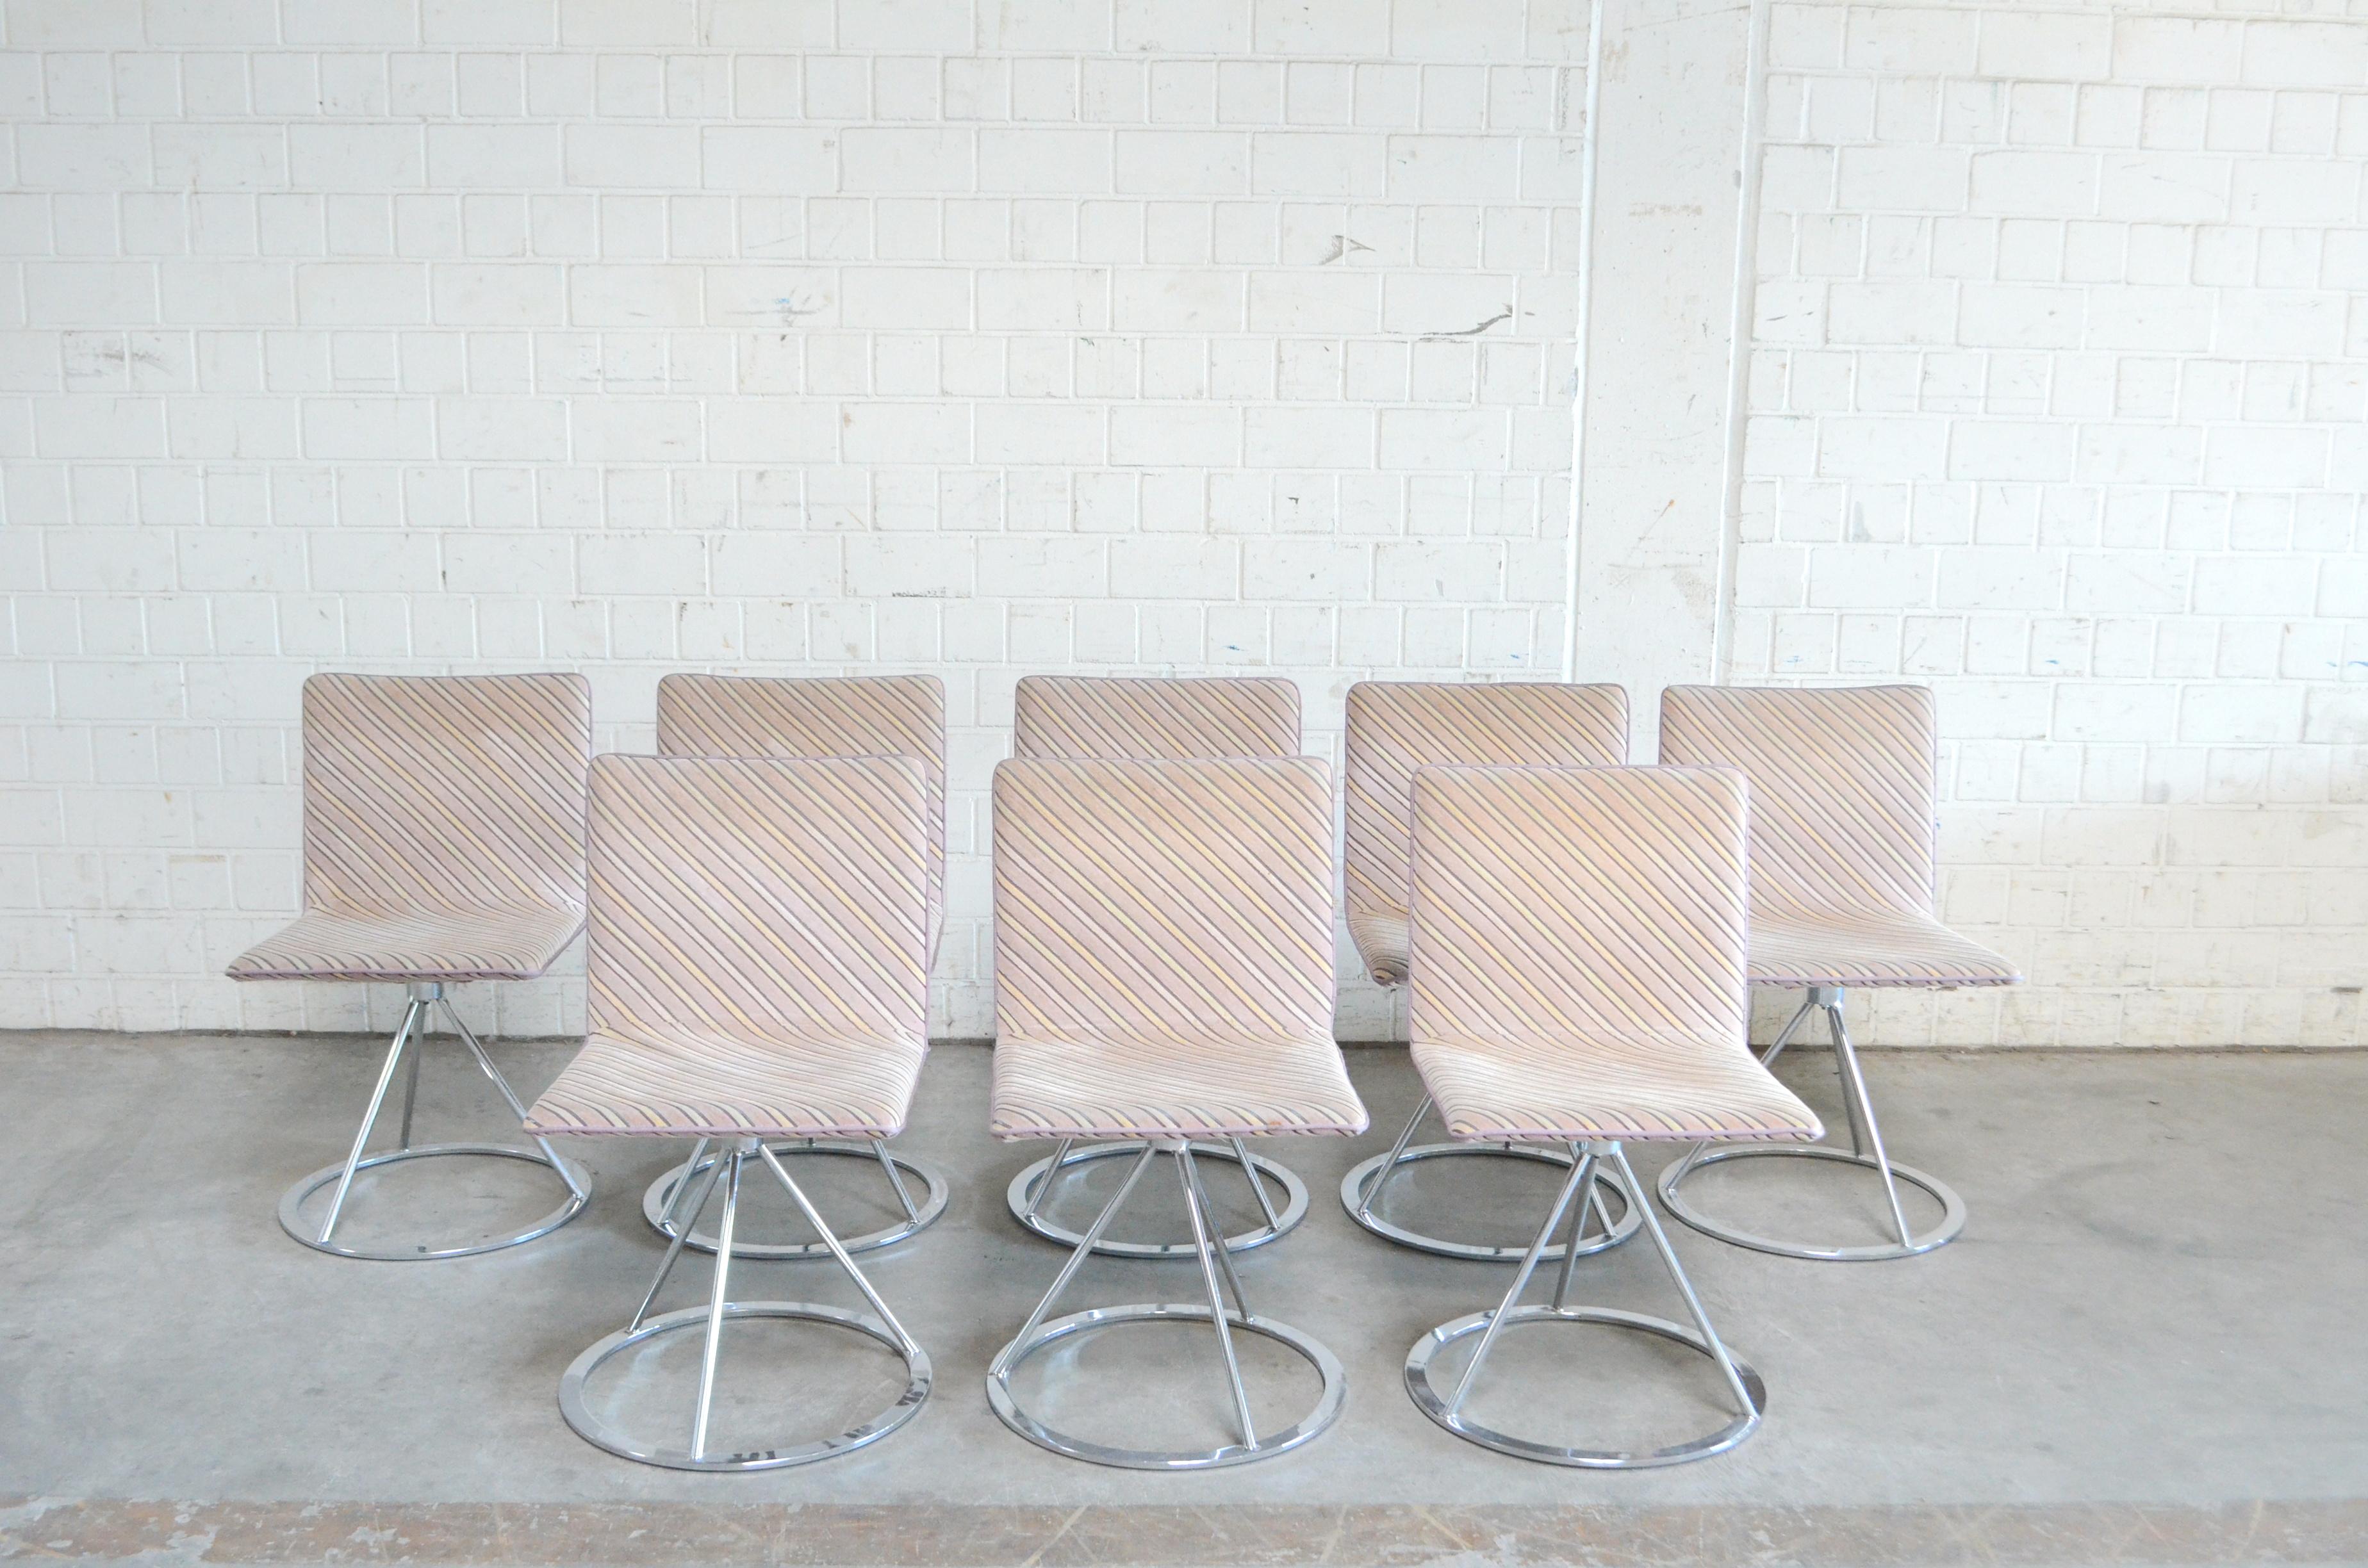 These Italian design chairs are designed by Salvati e Tresoldi and manufactured by Saporiti Italia.
A contemporary design chair with rotating chromed steel base and upholstered seat.
The fabric is a pastel strip pattern and has some signs of use